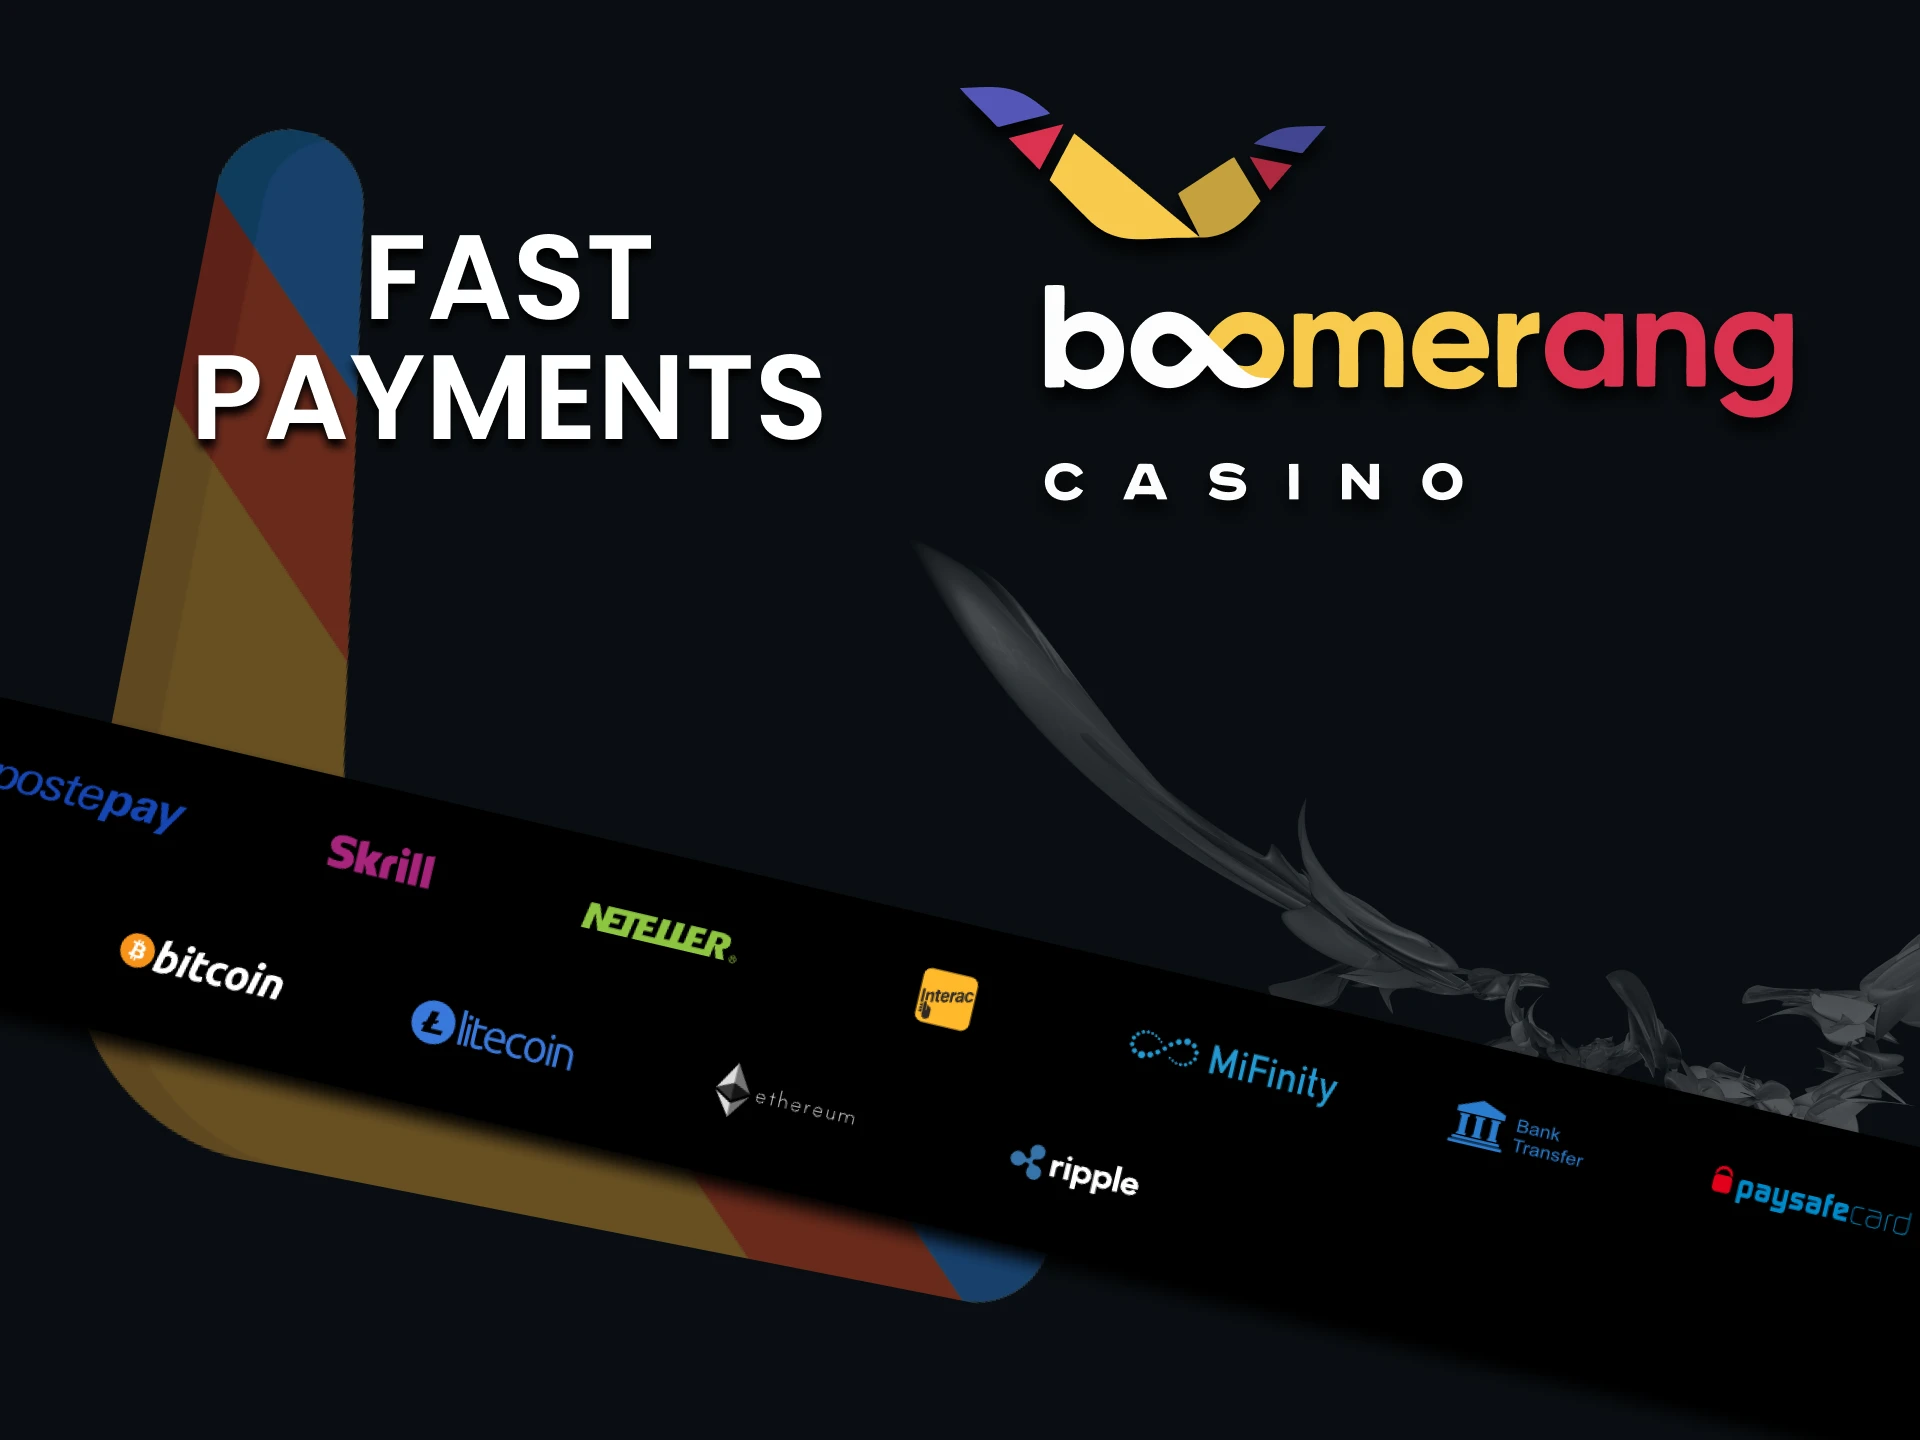 Find out about payment methods at Boomerang Casino.